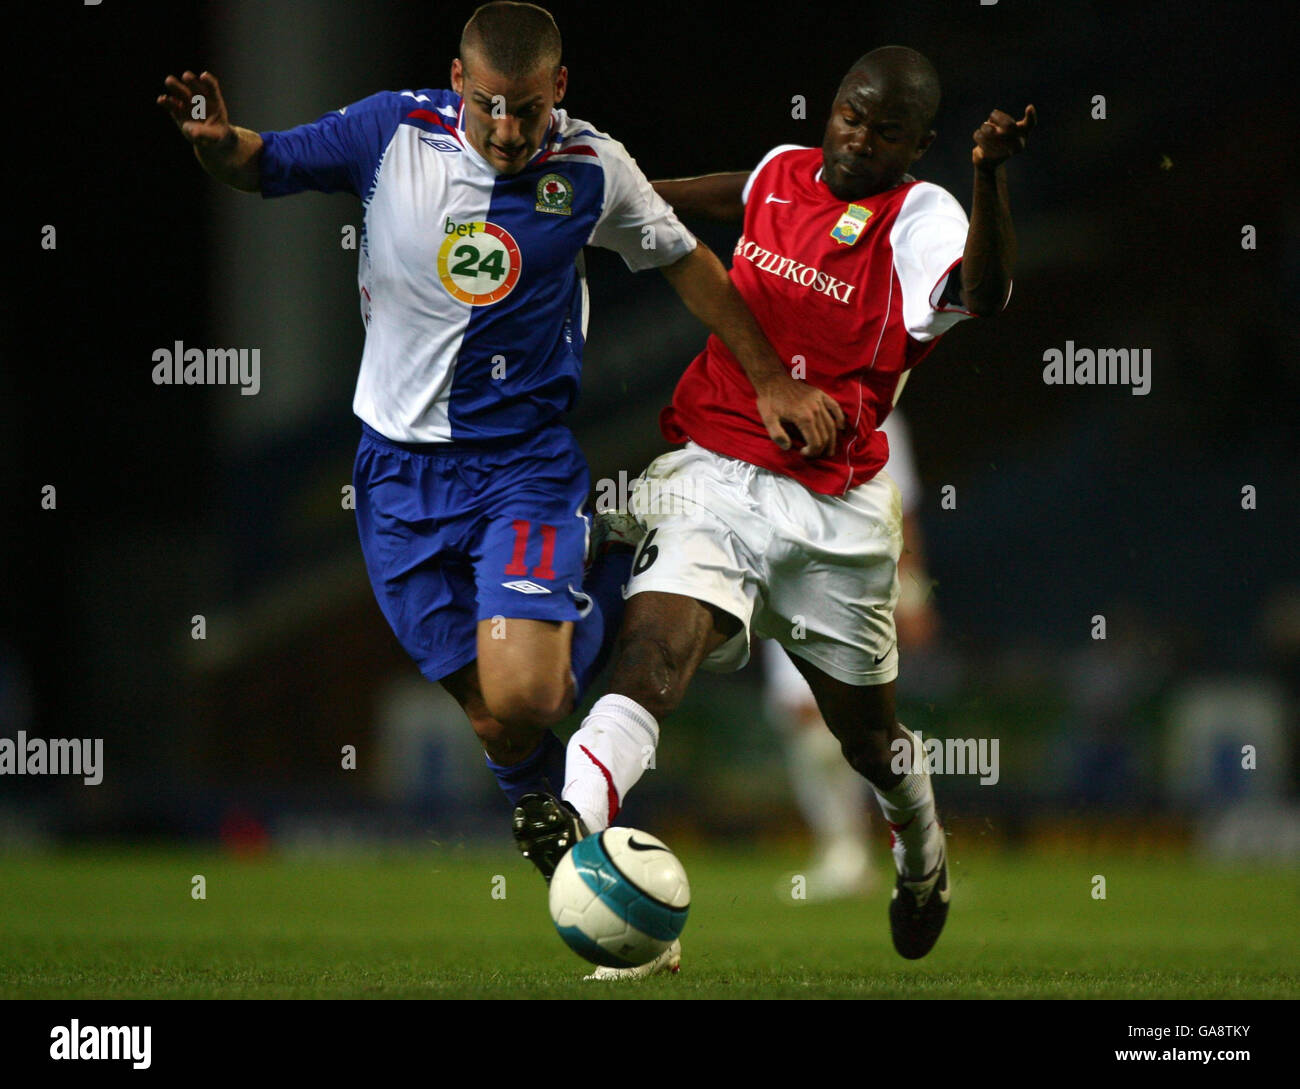 Blackburn Rovers' David Bentley (left) holds off a challenge from Mypa 47's Kuami Agboh during the UEFA Cup Second Qualifying Round Second Leg match at Ewood Park, Blackburn. Stock Photo